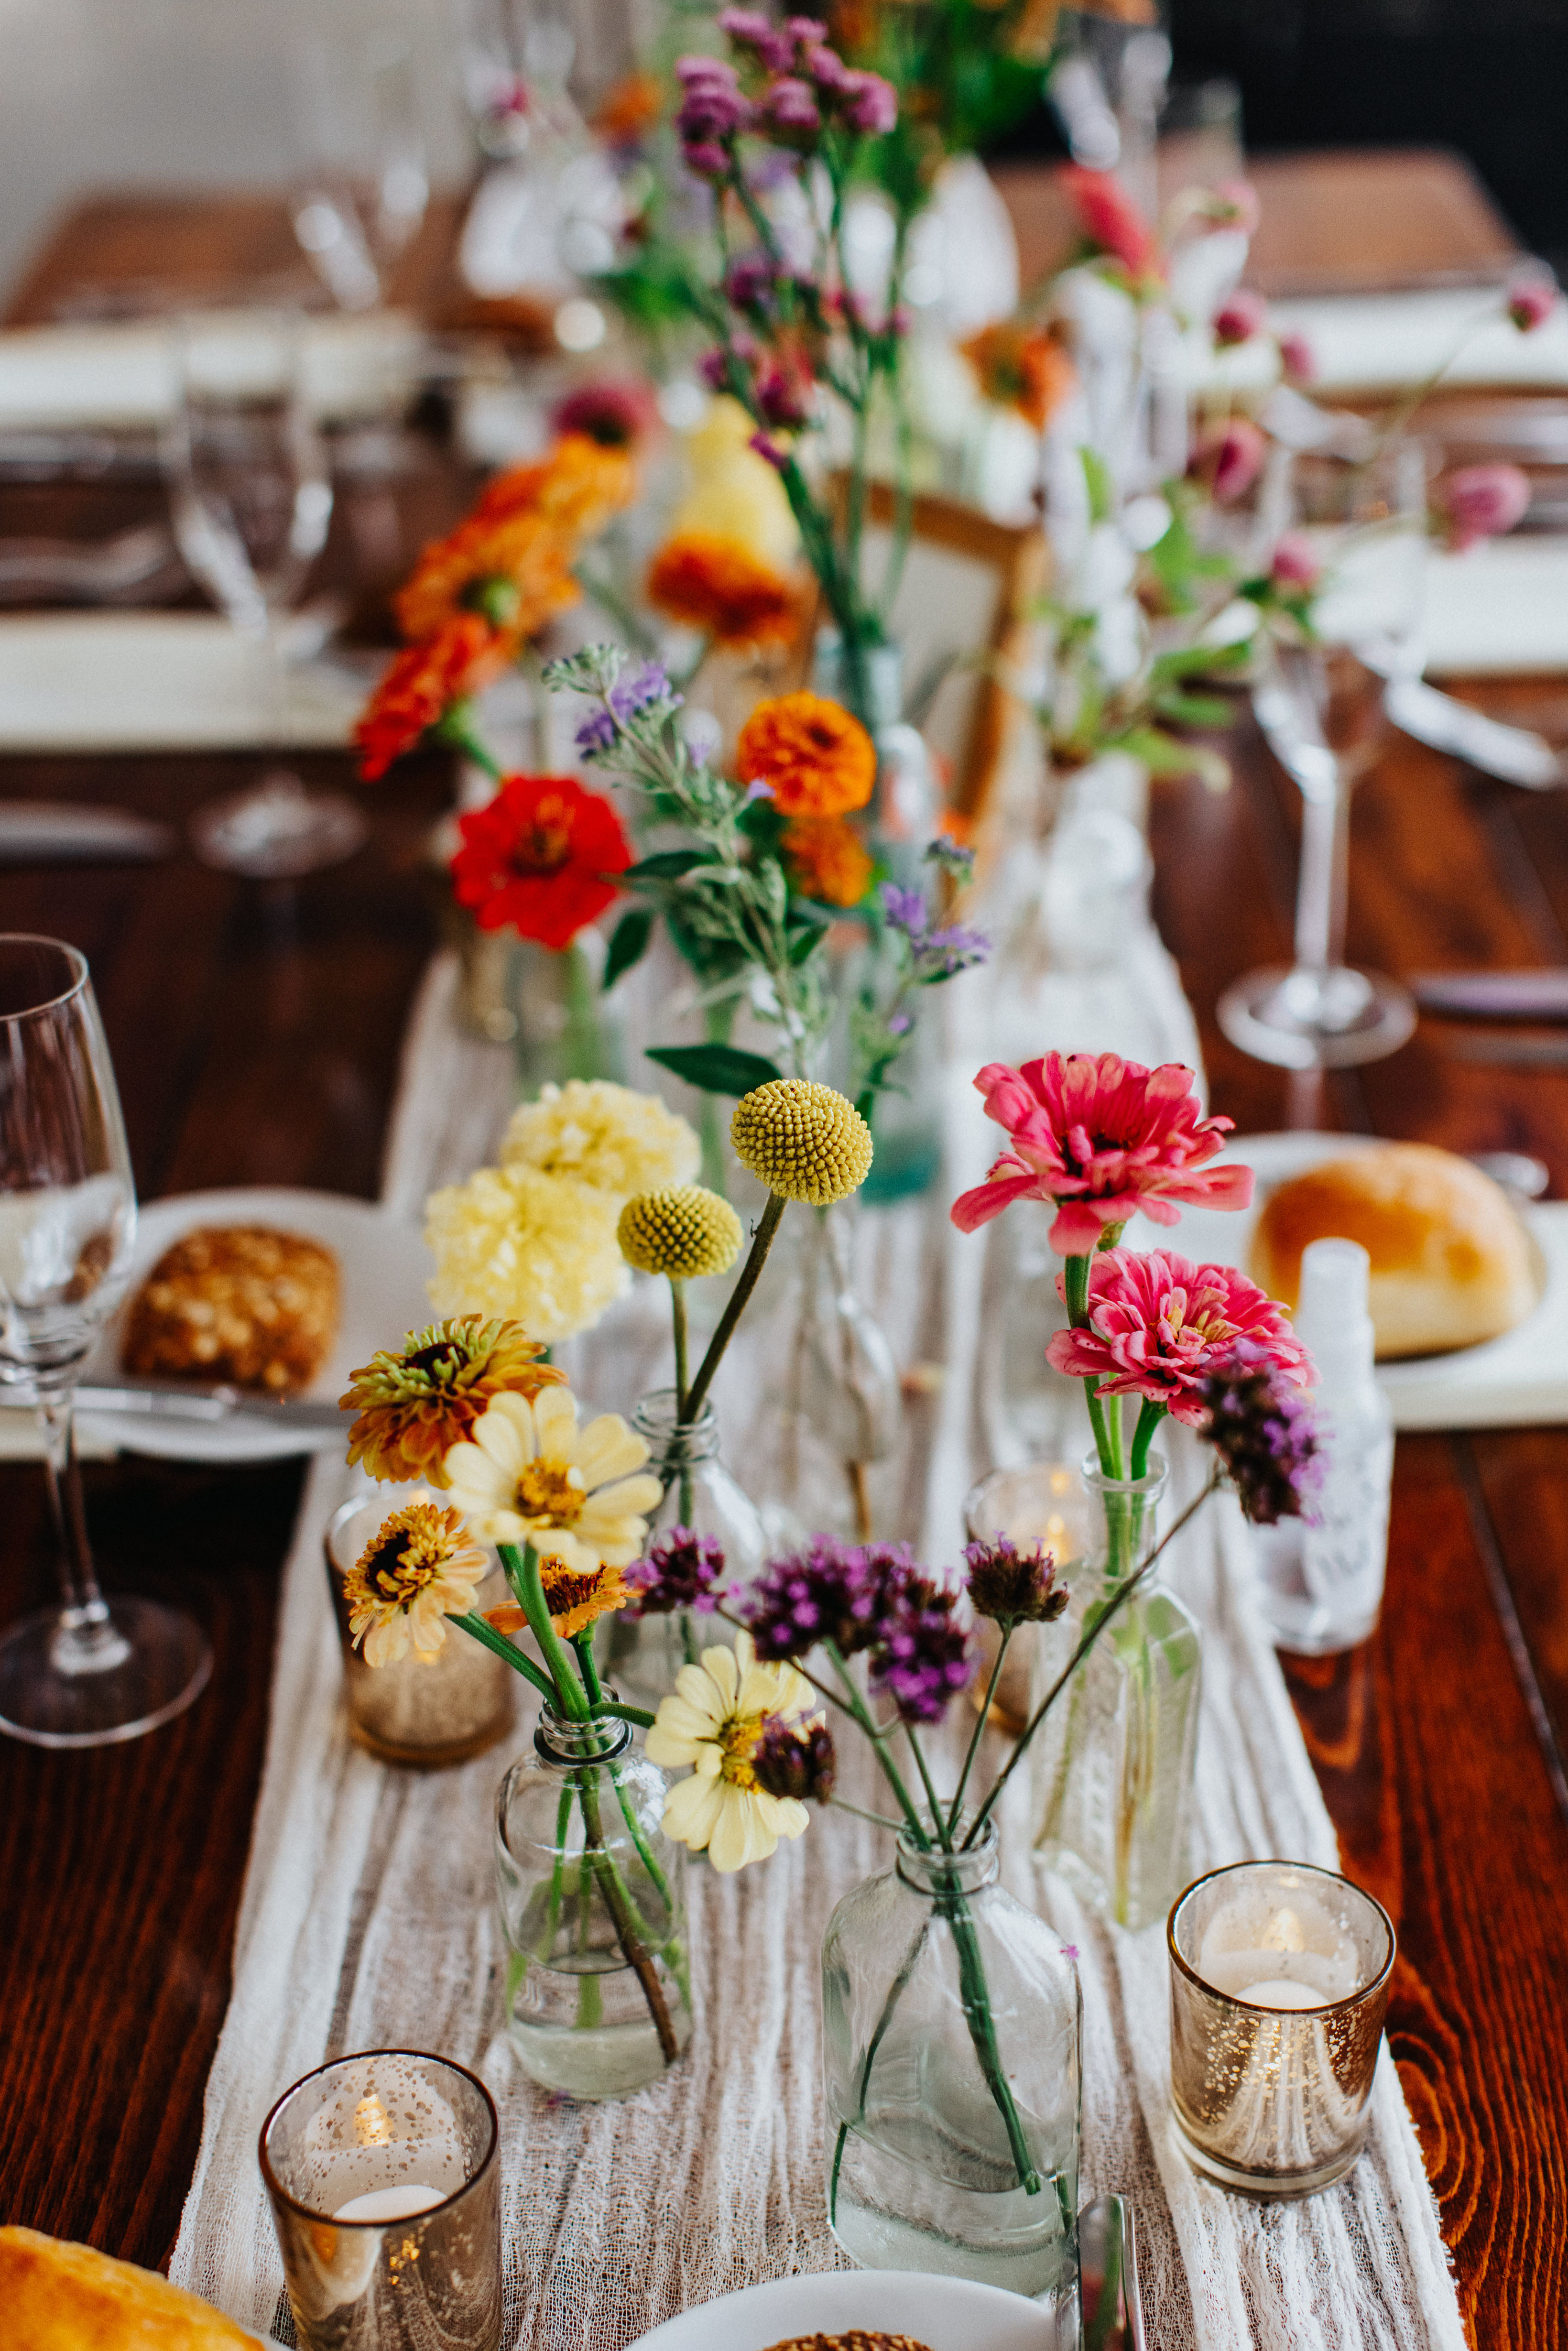 Rustic Table Decor with Bright Flowers